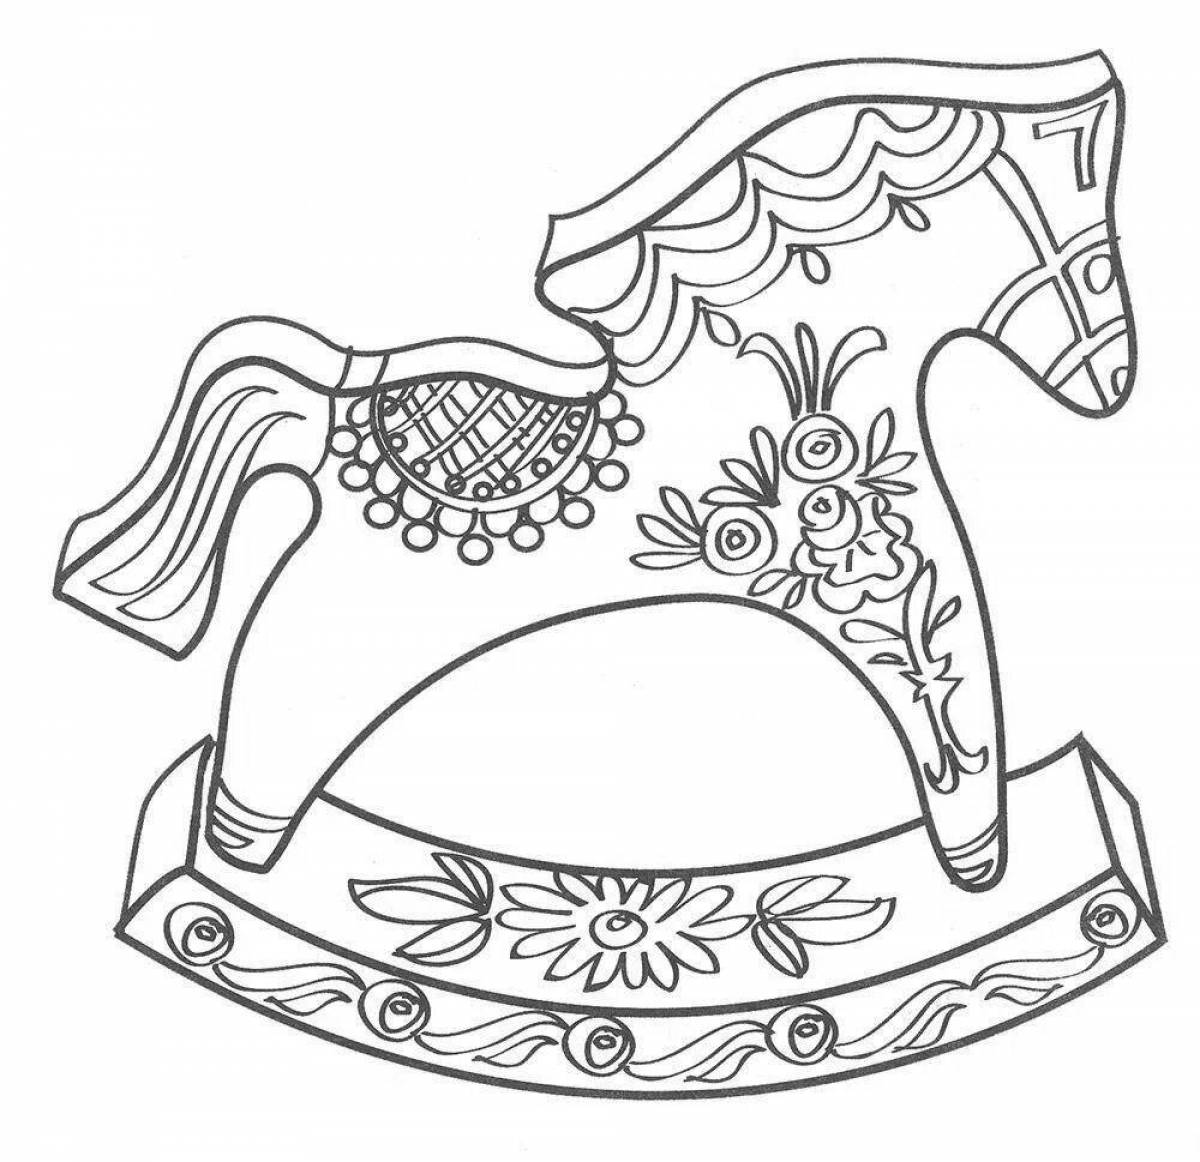 Coloring page spectacular Gorodets horse